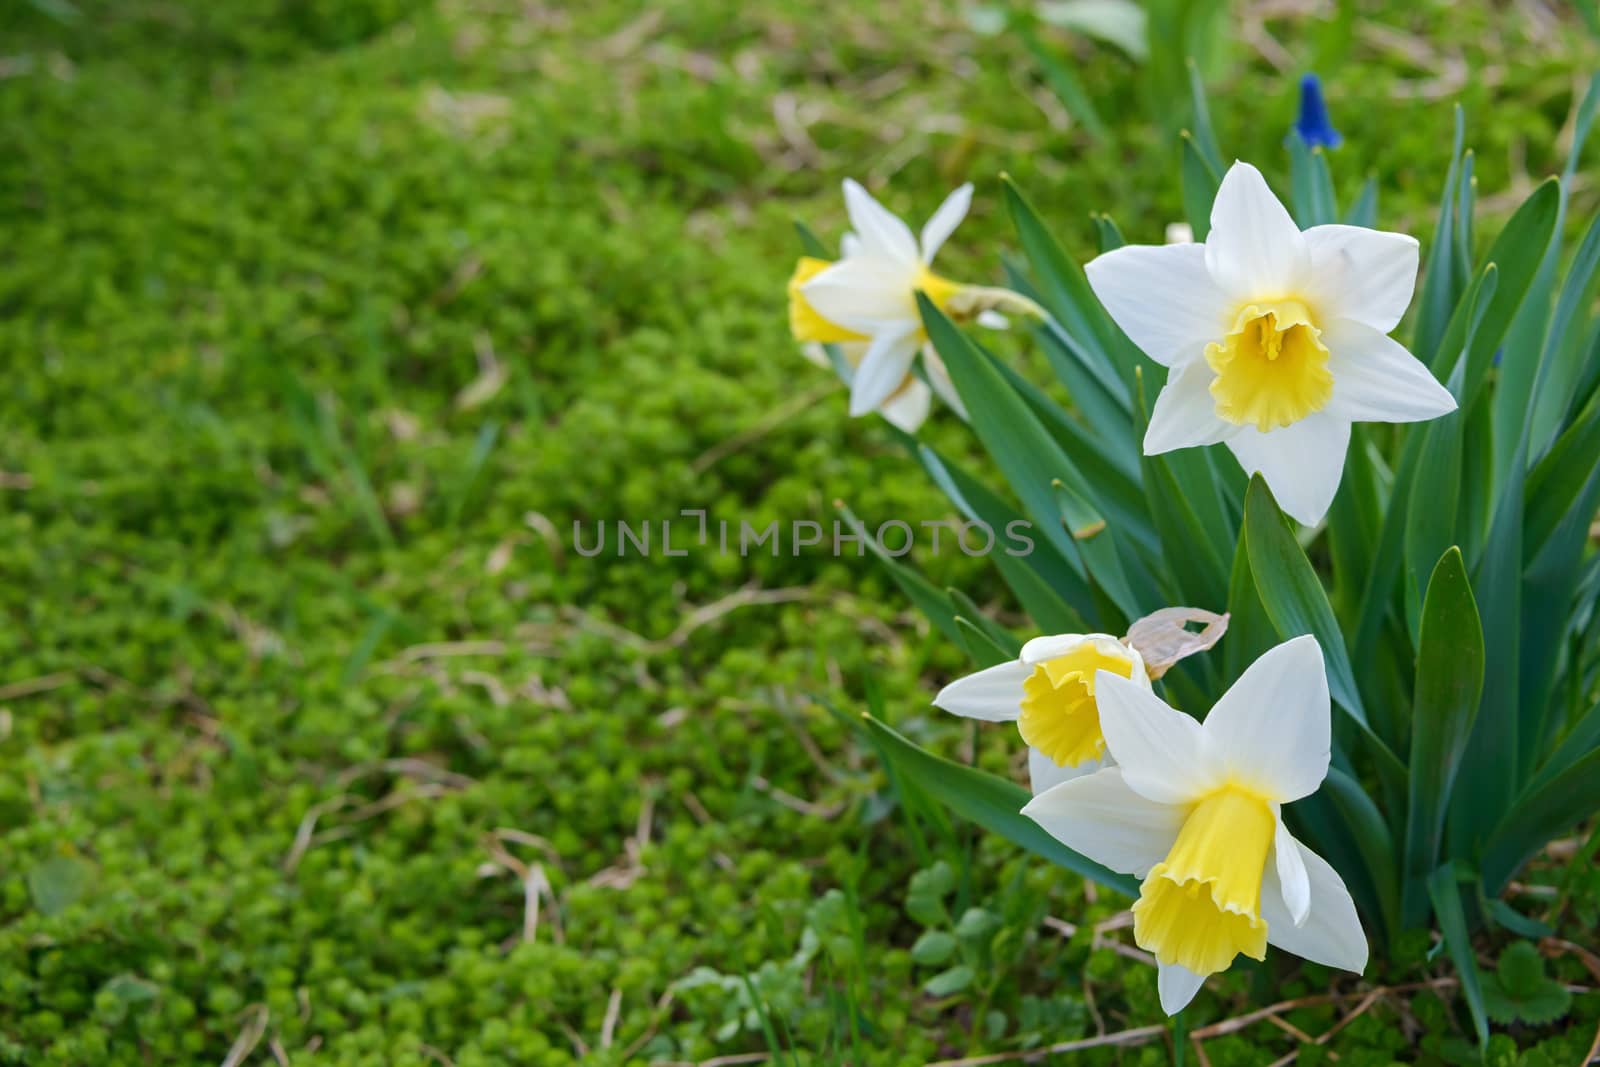 White with yellow middle daffodils with dense narrow leaves bloom in spring on a green blurred grass background.